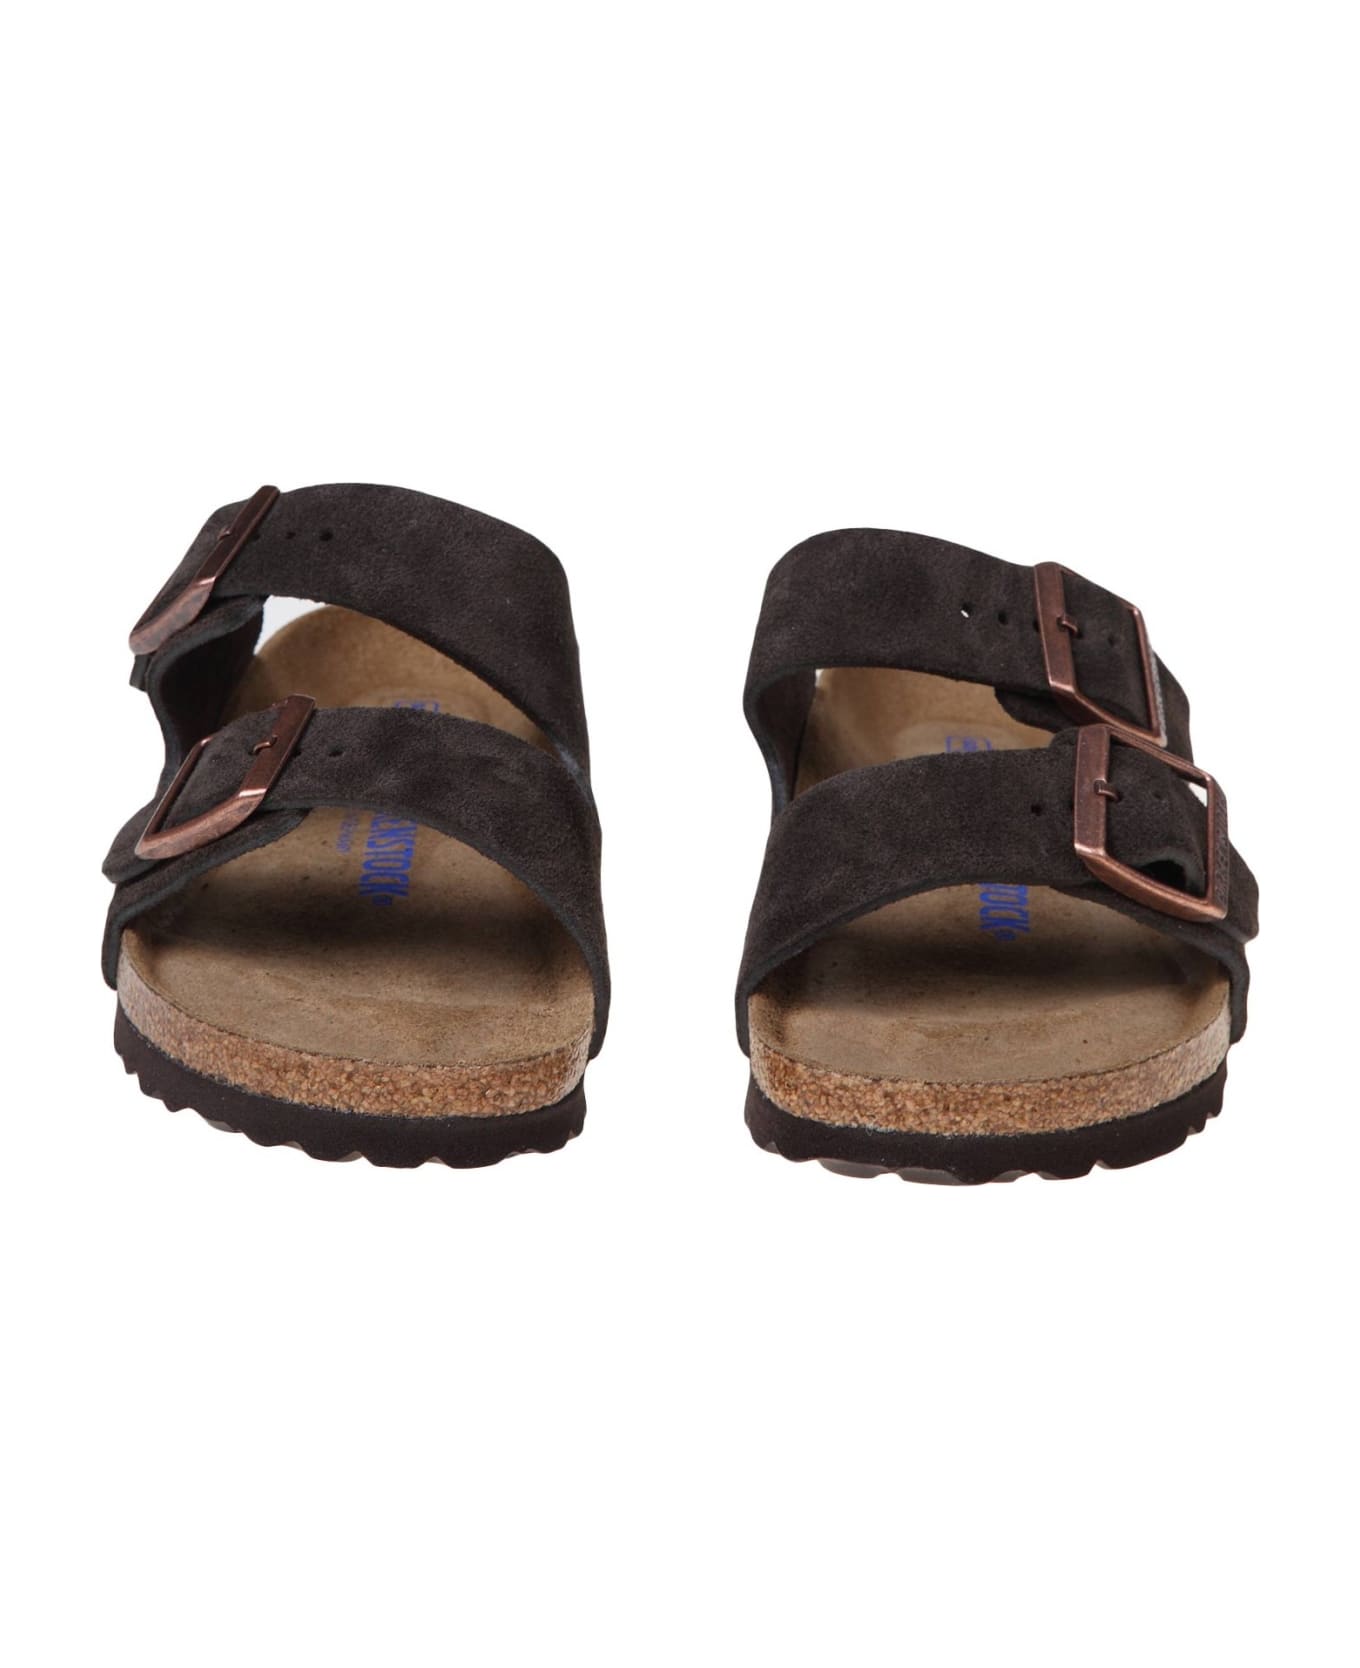 Birkenstock Arizona Sfb Oiled In Mocca Suede Leather その他各種シューズ